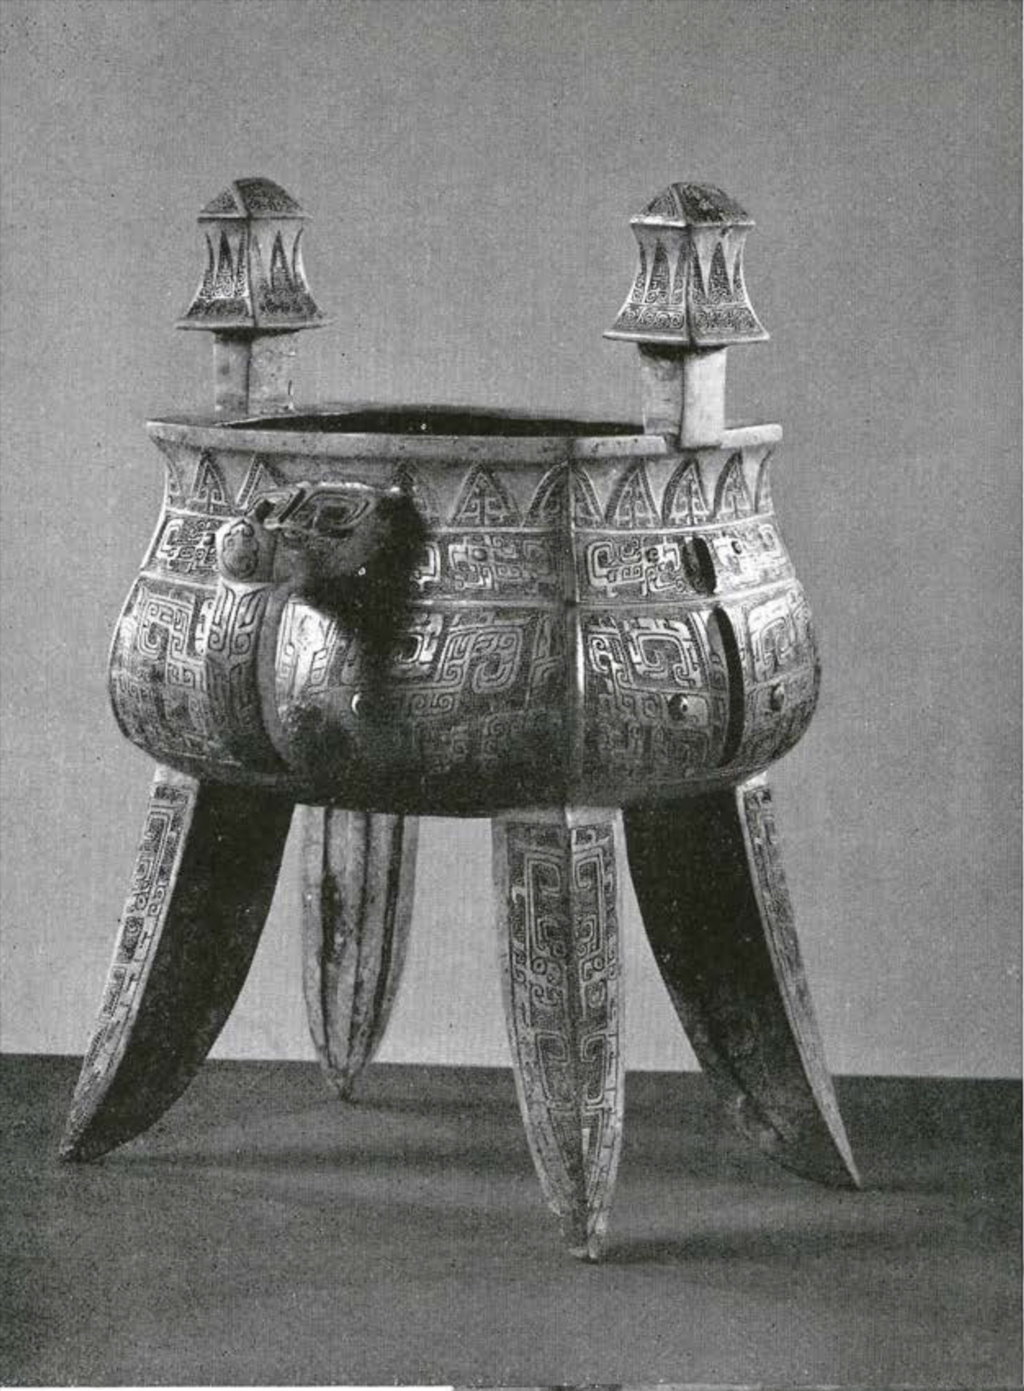 Four legged bronze vessel with two handles in the shape of towers or mushrooms